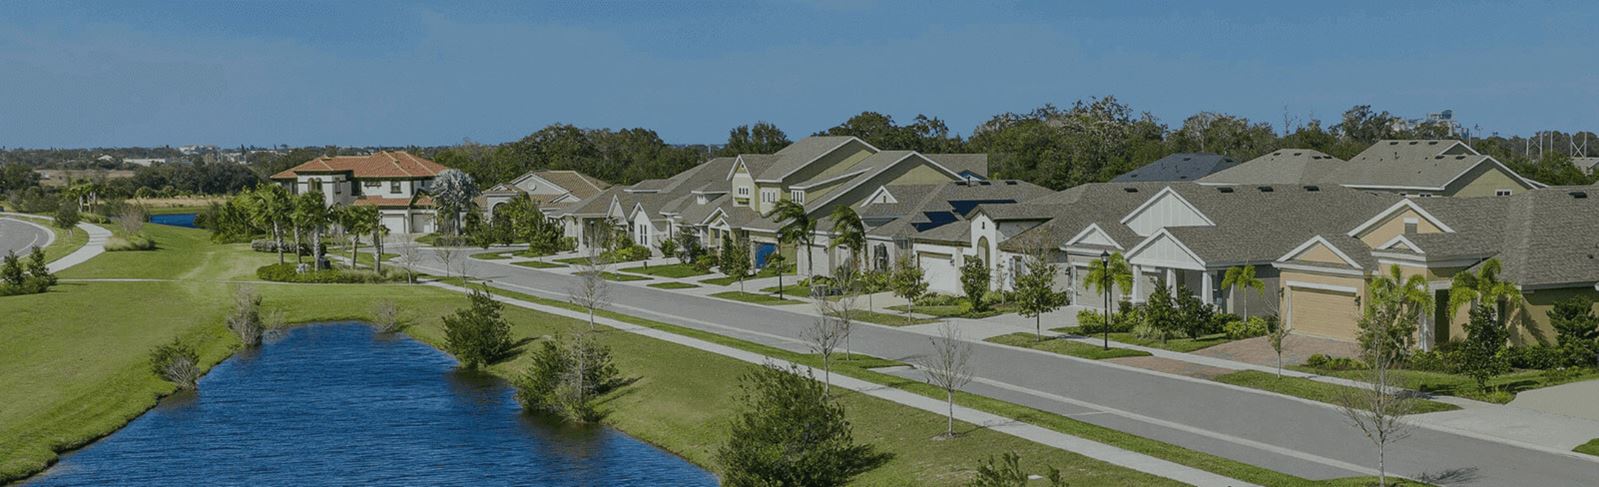 New homes for sale in Apollo Beach, Florida at Waterset